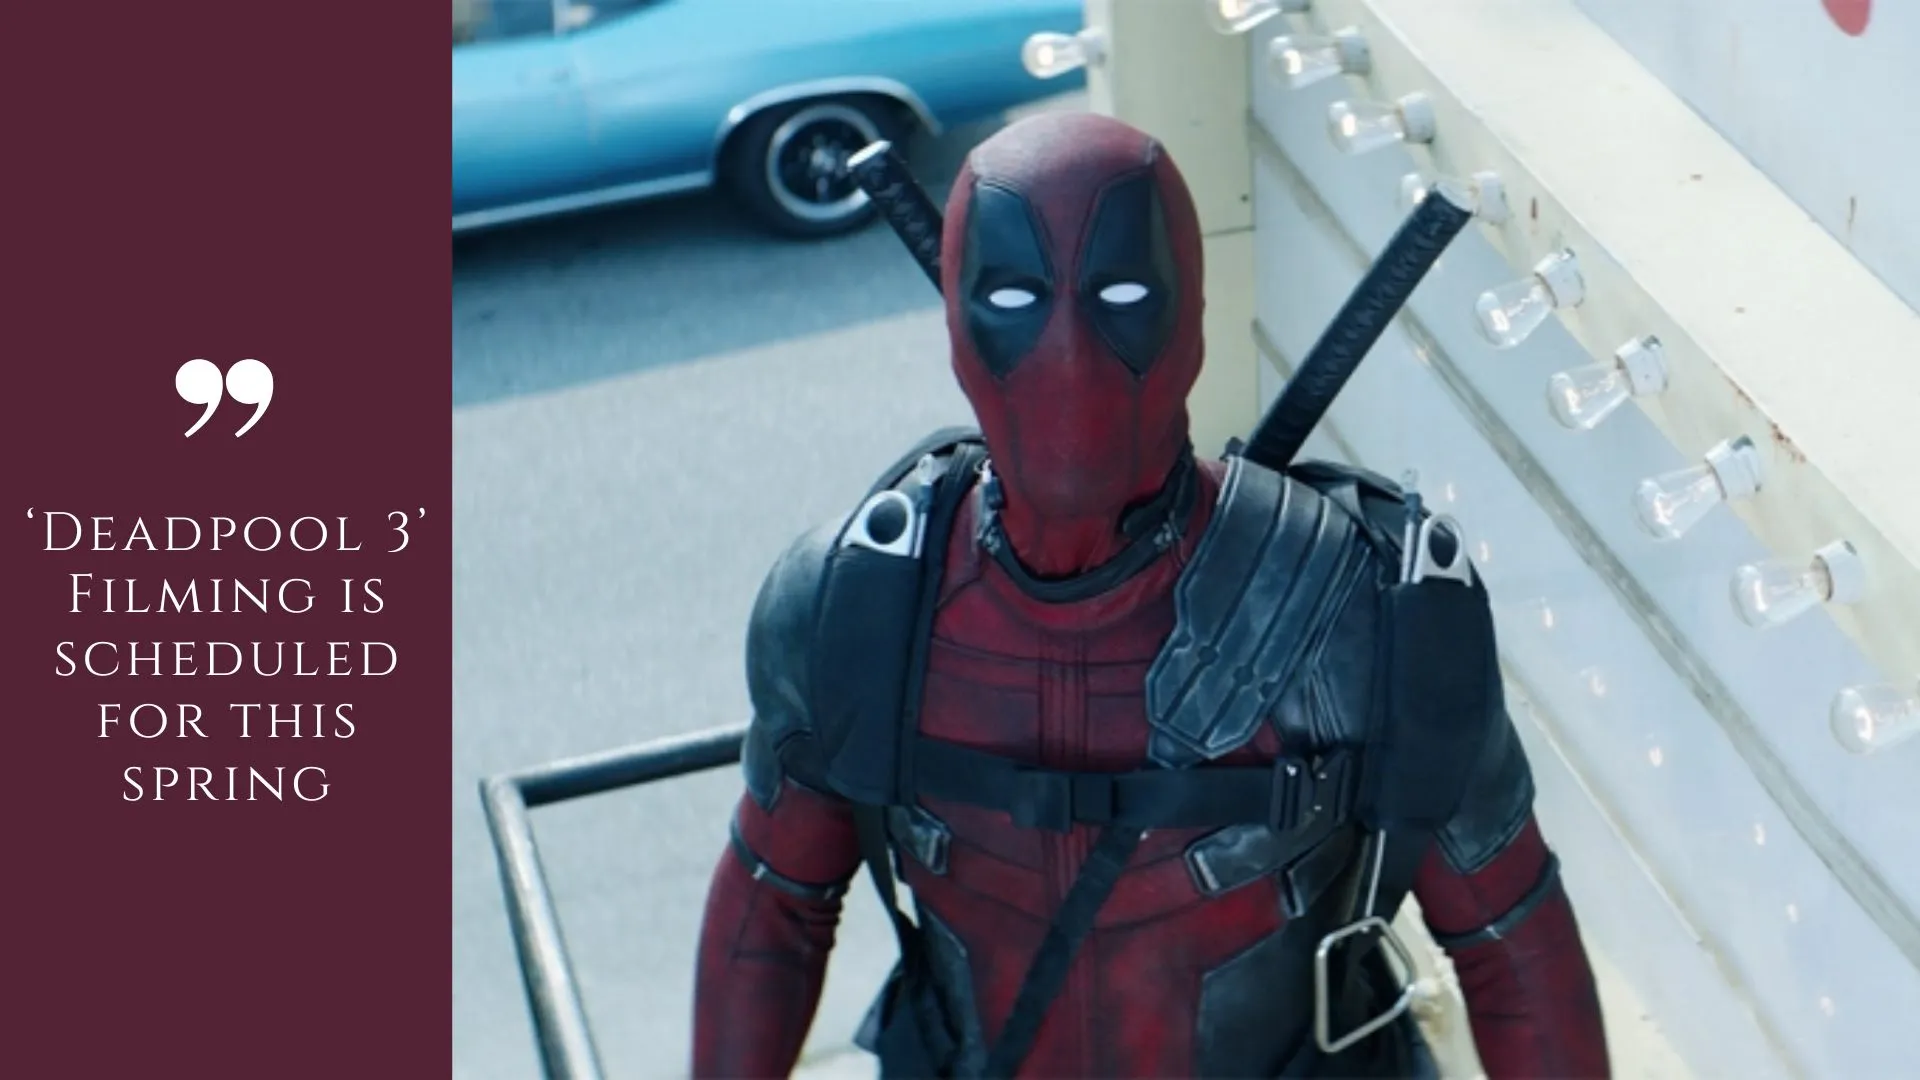 ‘Deadpool 3’ Filming is scheduled for this spring (Image credit: vareity)